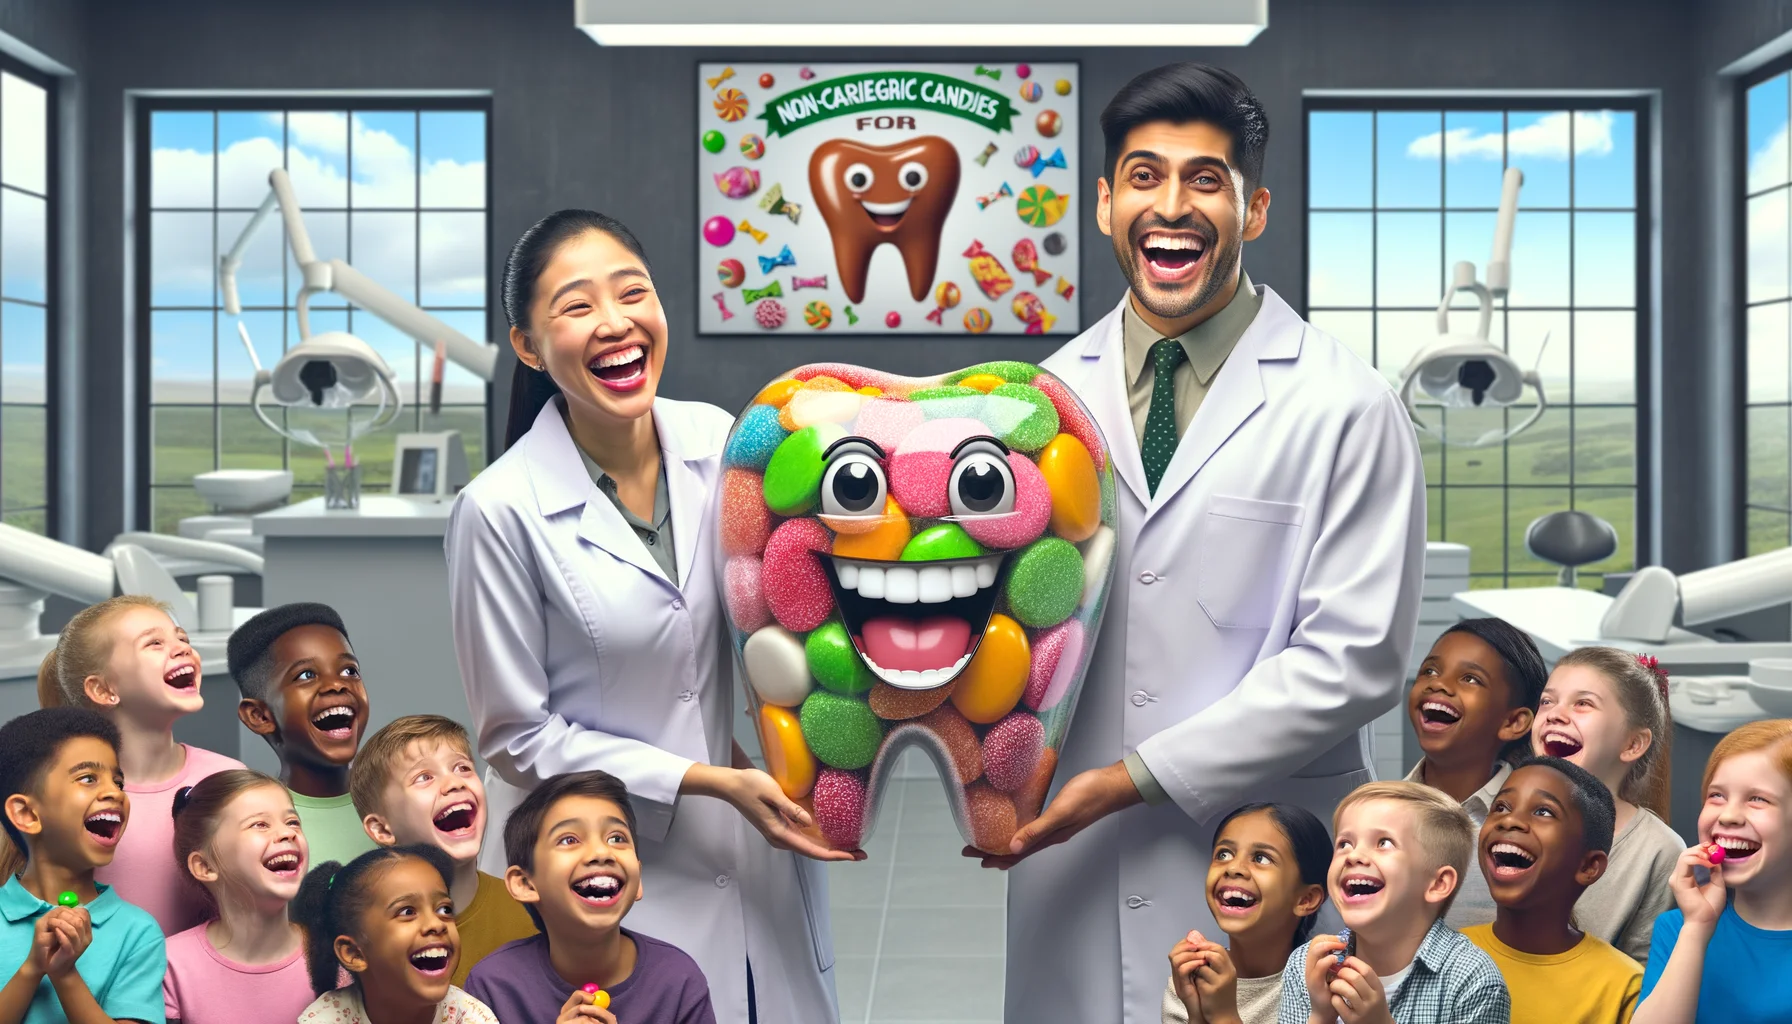 Create a humorous image based on a realistic scenario highlighting the theme, 'Non-Cariogenic Candies for Dental Health'. Picture a South Asian male dentist presenting a large, vibrant, caricature-size, non-cariogenic candy in his clinic. His Caucasian female assistant, laughing heartily, holds a big, shiny, perfect tooth model with a sparkling white smile. The clinic's walls are decorated with funny dental-themed cartoons, and the reception area has a large banner that reads 'Non-Cariogenic Candies for Dental Health'. There's a group of happy, multi-ethnic children of various genders watching with excitement, their hands full of those colorful candies.